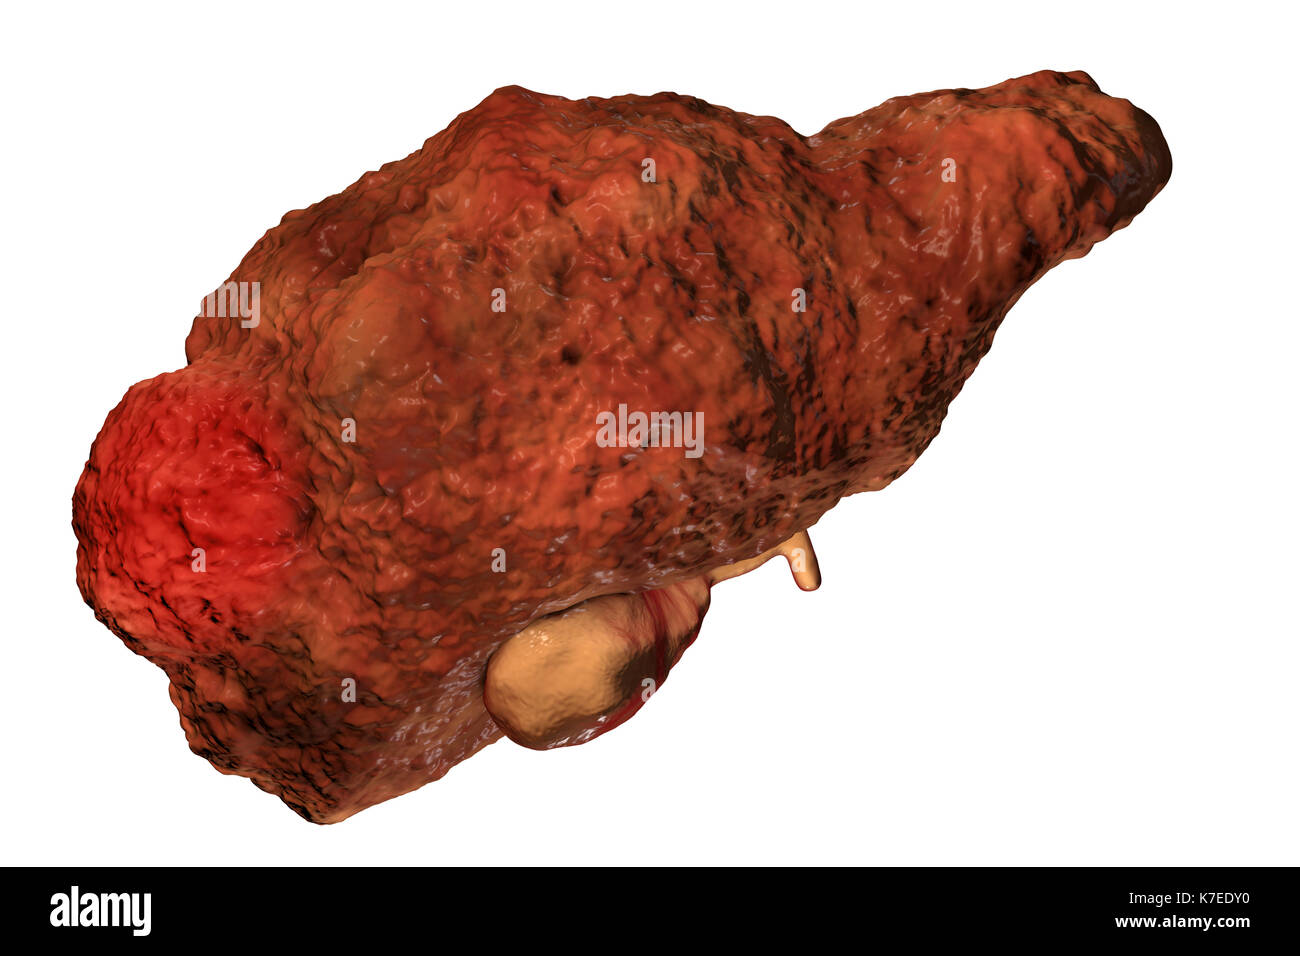 Cirrhotic liver with hepatocellular carcinoma, computer artwork. One of the causes of hepatocellular carcinoma is viral infection, particularly with hepatitis C viruses (HCV). Hepatitis C is a common cause of chronic hepatitis which progresses to liver cirrhosis. Viruses cause cell death (necrosis) in the hepatic lobules, which leads to scarring. This causes the liver surface to appear rough and lumpy instead of the usual smooth healthy appearance. The disease is irreversible and may lead to liver carcinoma. Stock Photo